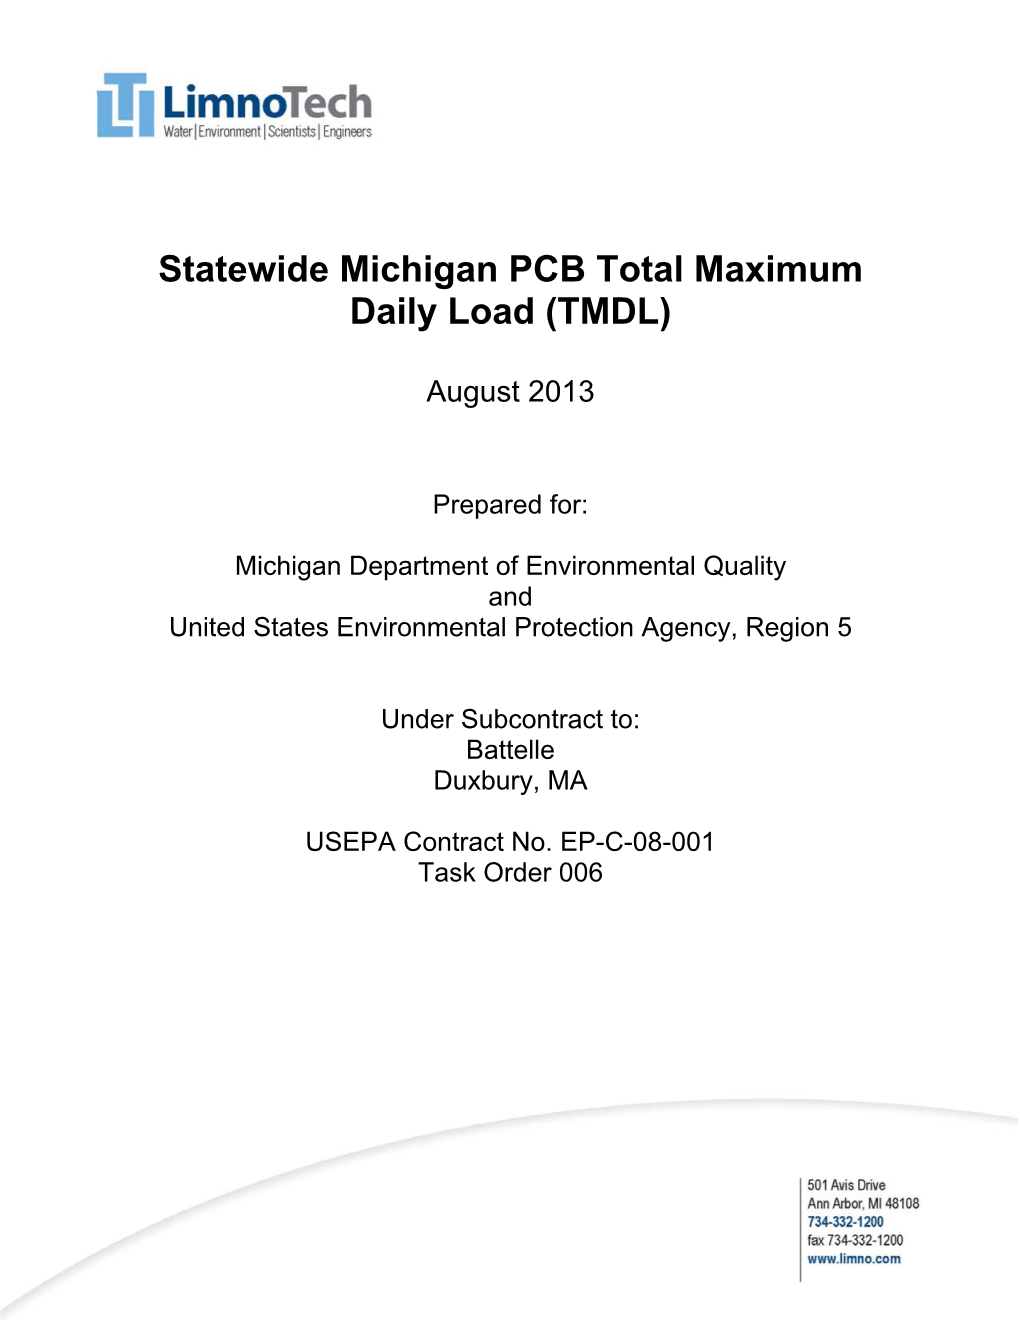 Statewide Michigan PCB Total Maximum Daily Load (TMDL)